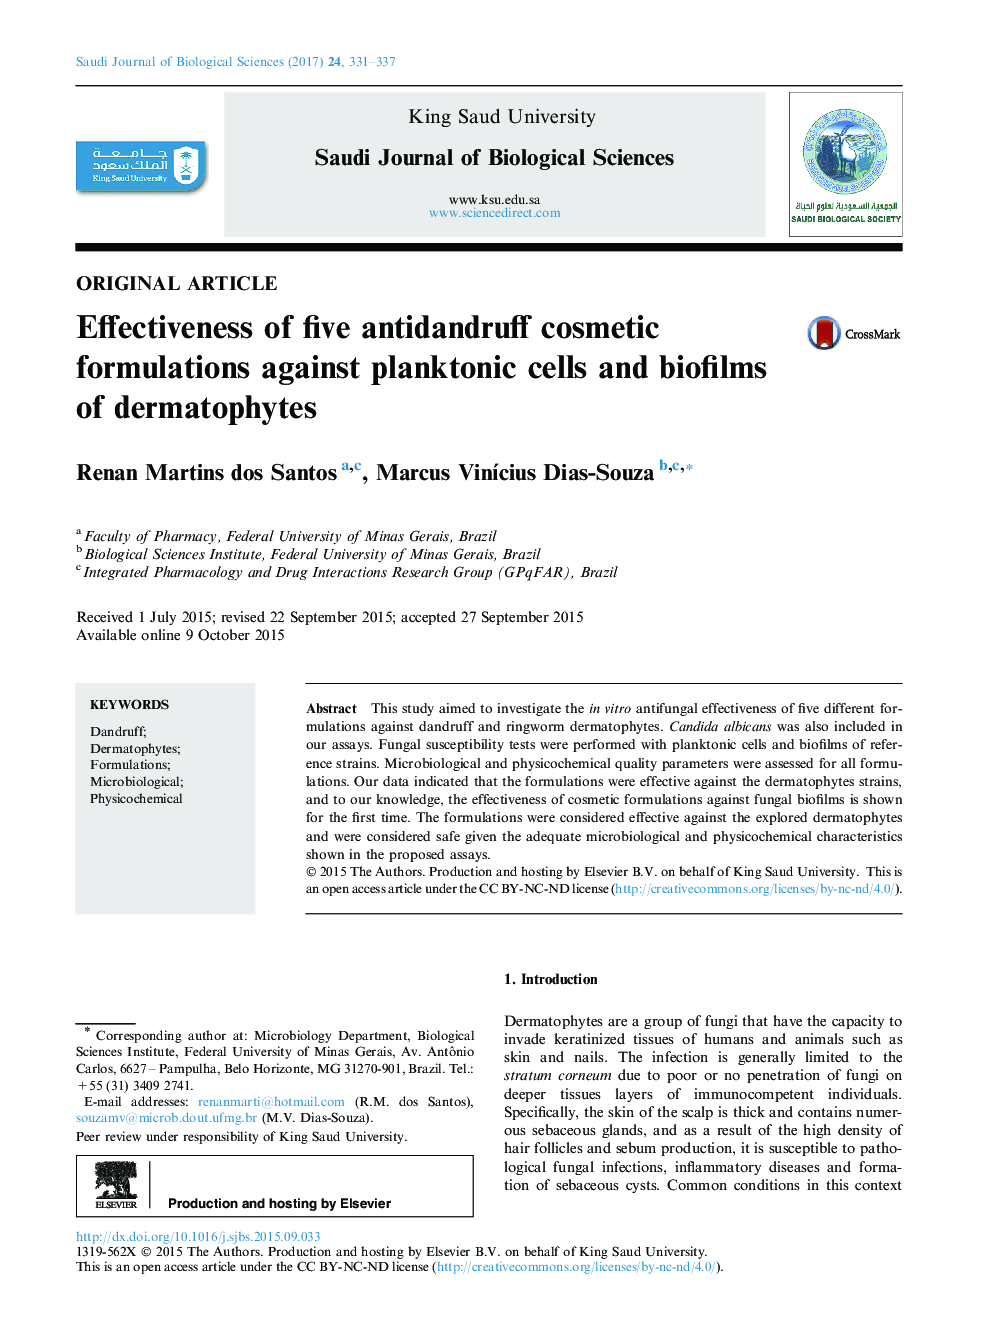 Original articleEffectiveness of five antidandruff cosmetic formulations against planktonic cells and biofilms of dermatophytes